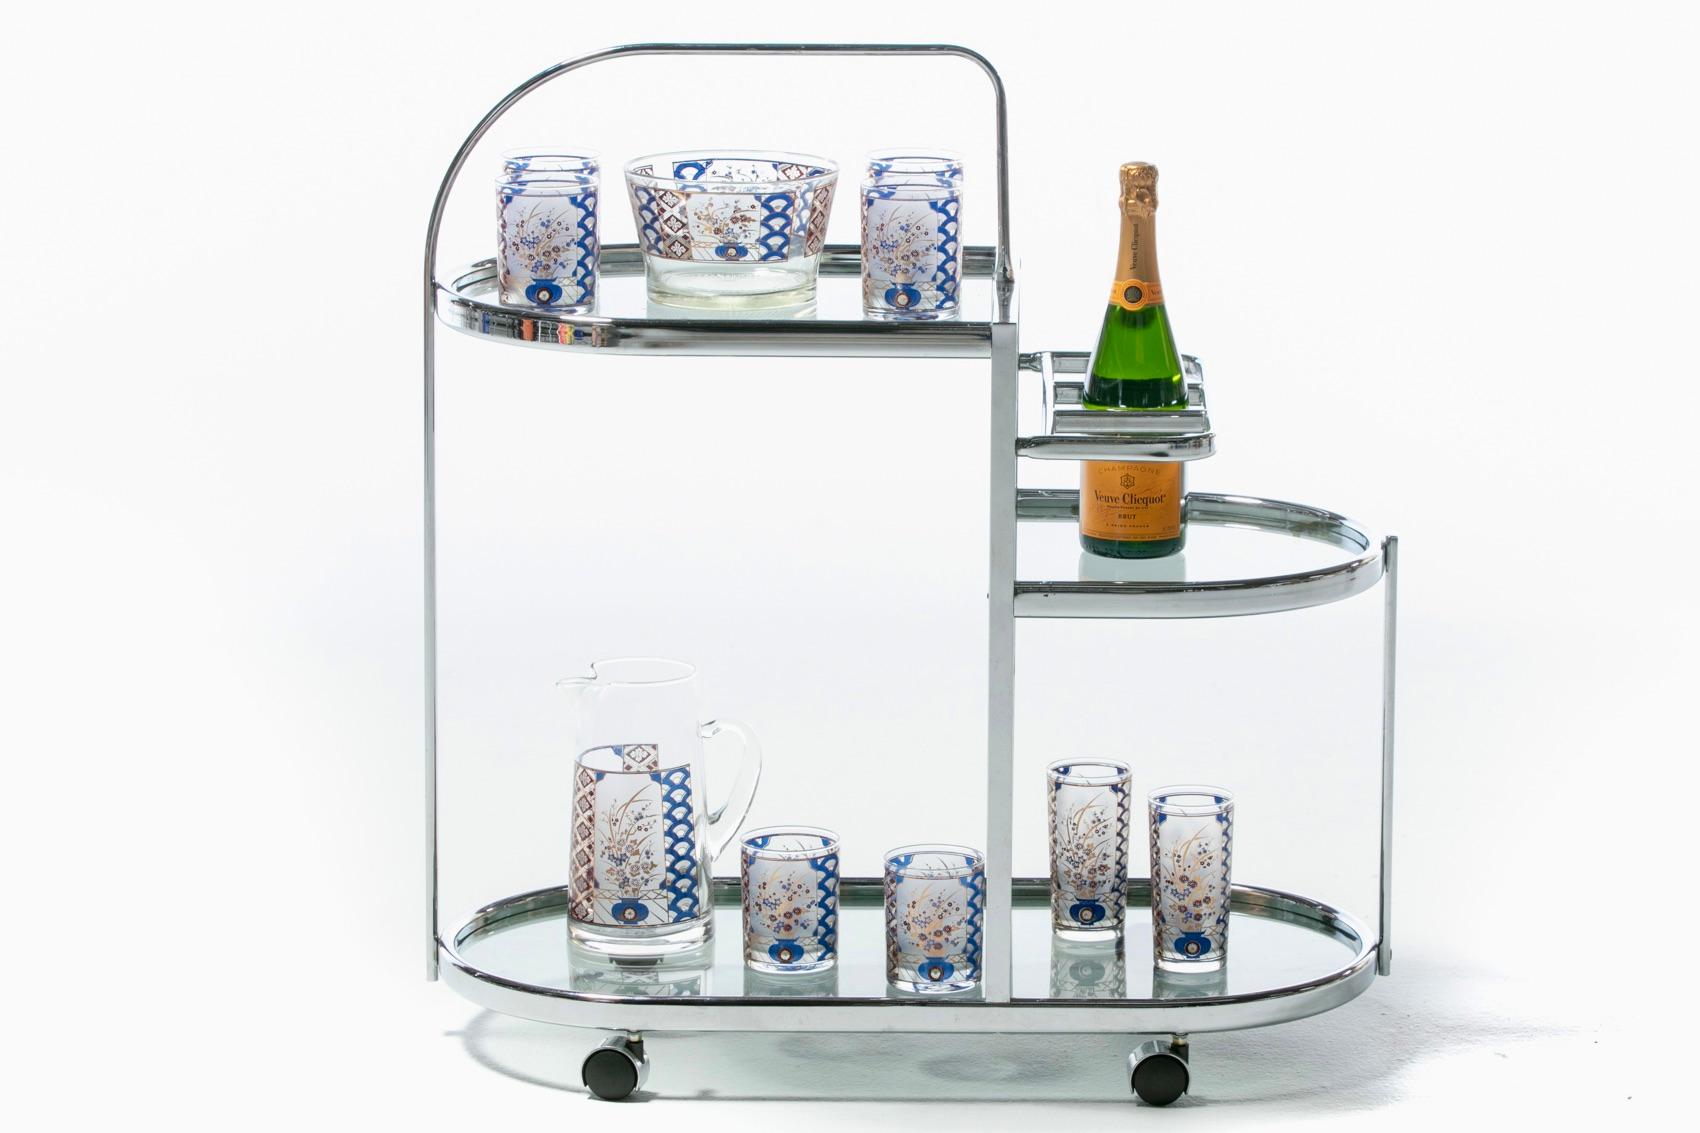 With an almost Art Deco inspired skyscraper silhouette, this sleek and sexy 1970s chrome bar cart rises up in layers of chrome, glass and softly rounded edges. The look is modern, clean and light. The bar cart features three glass top shelves. Top